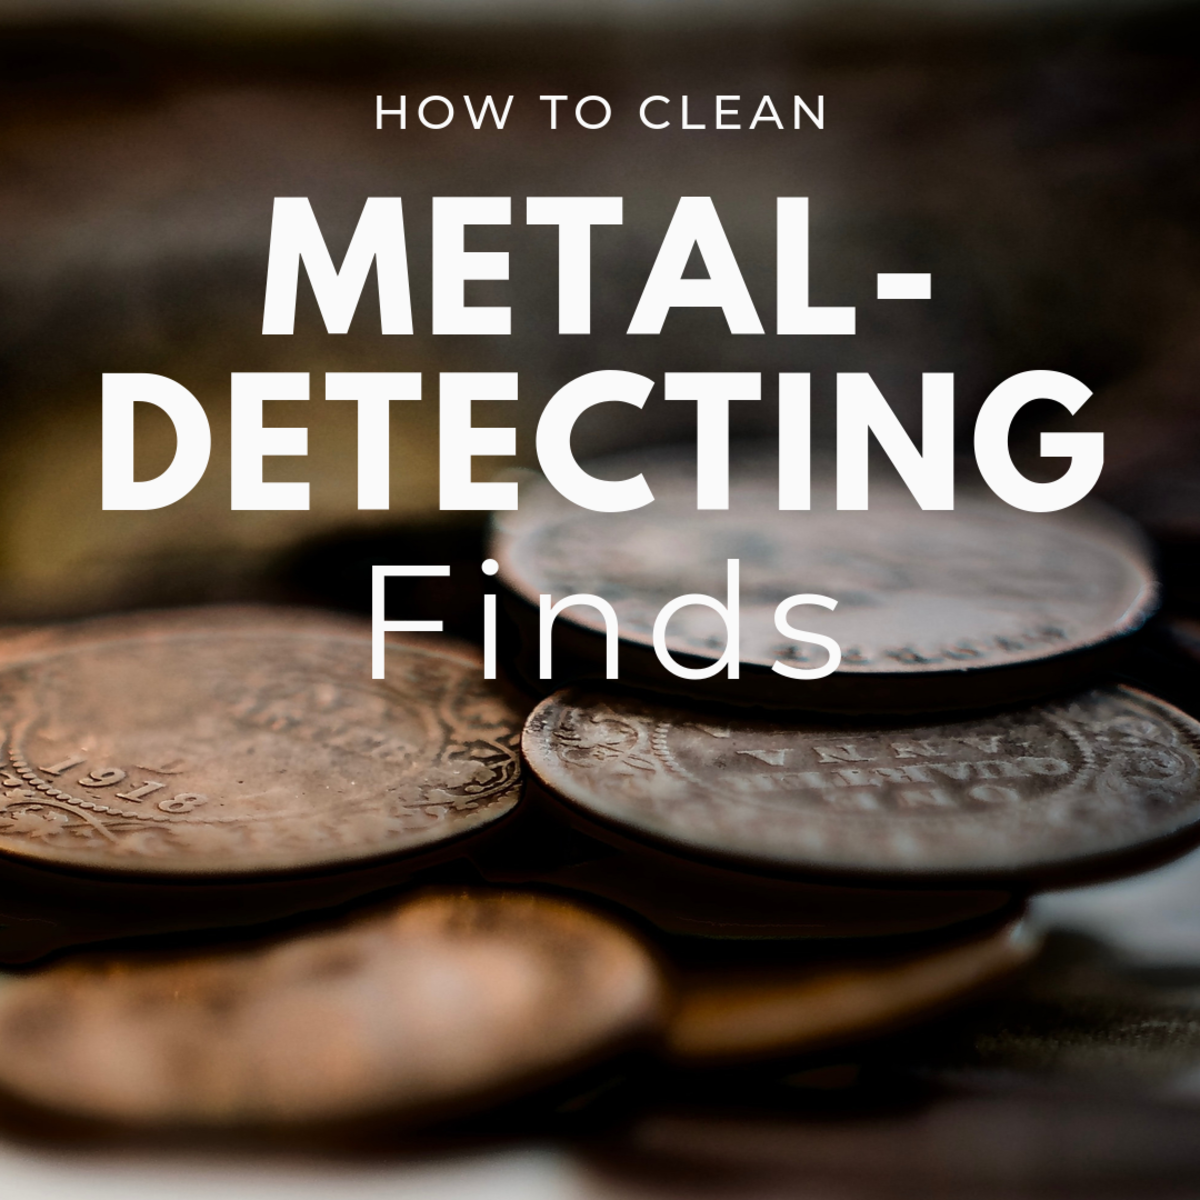 The best ways to clean metal-detecting finds